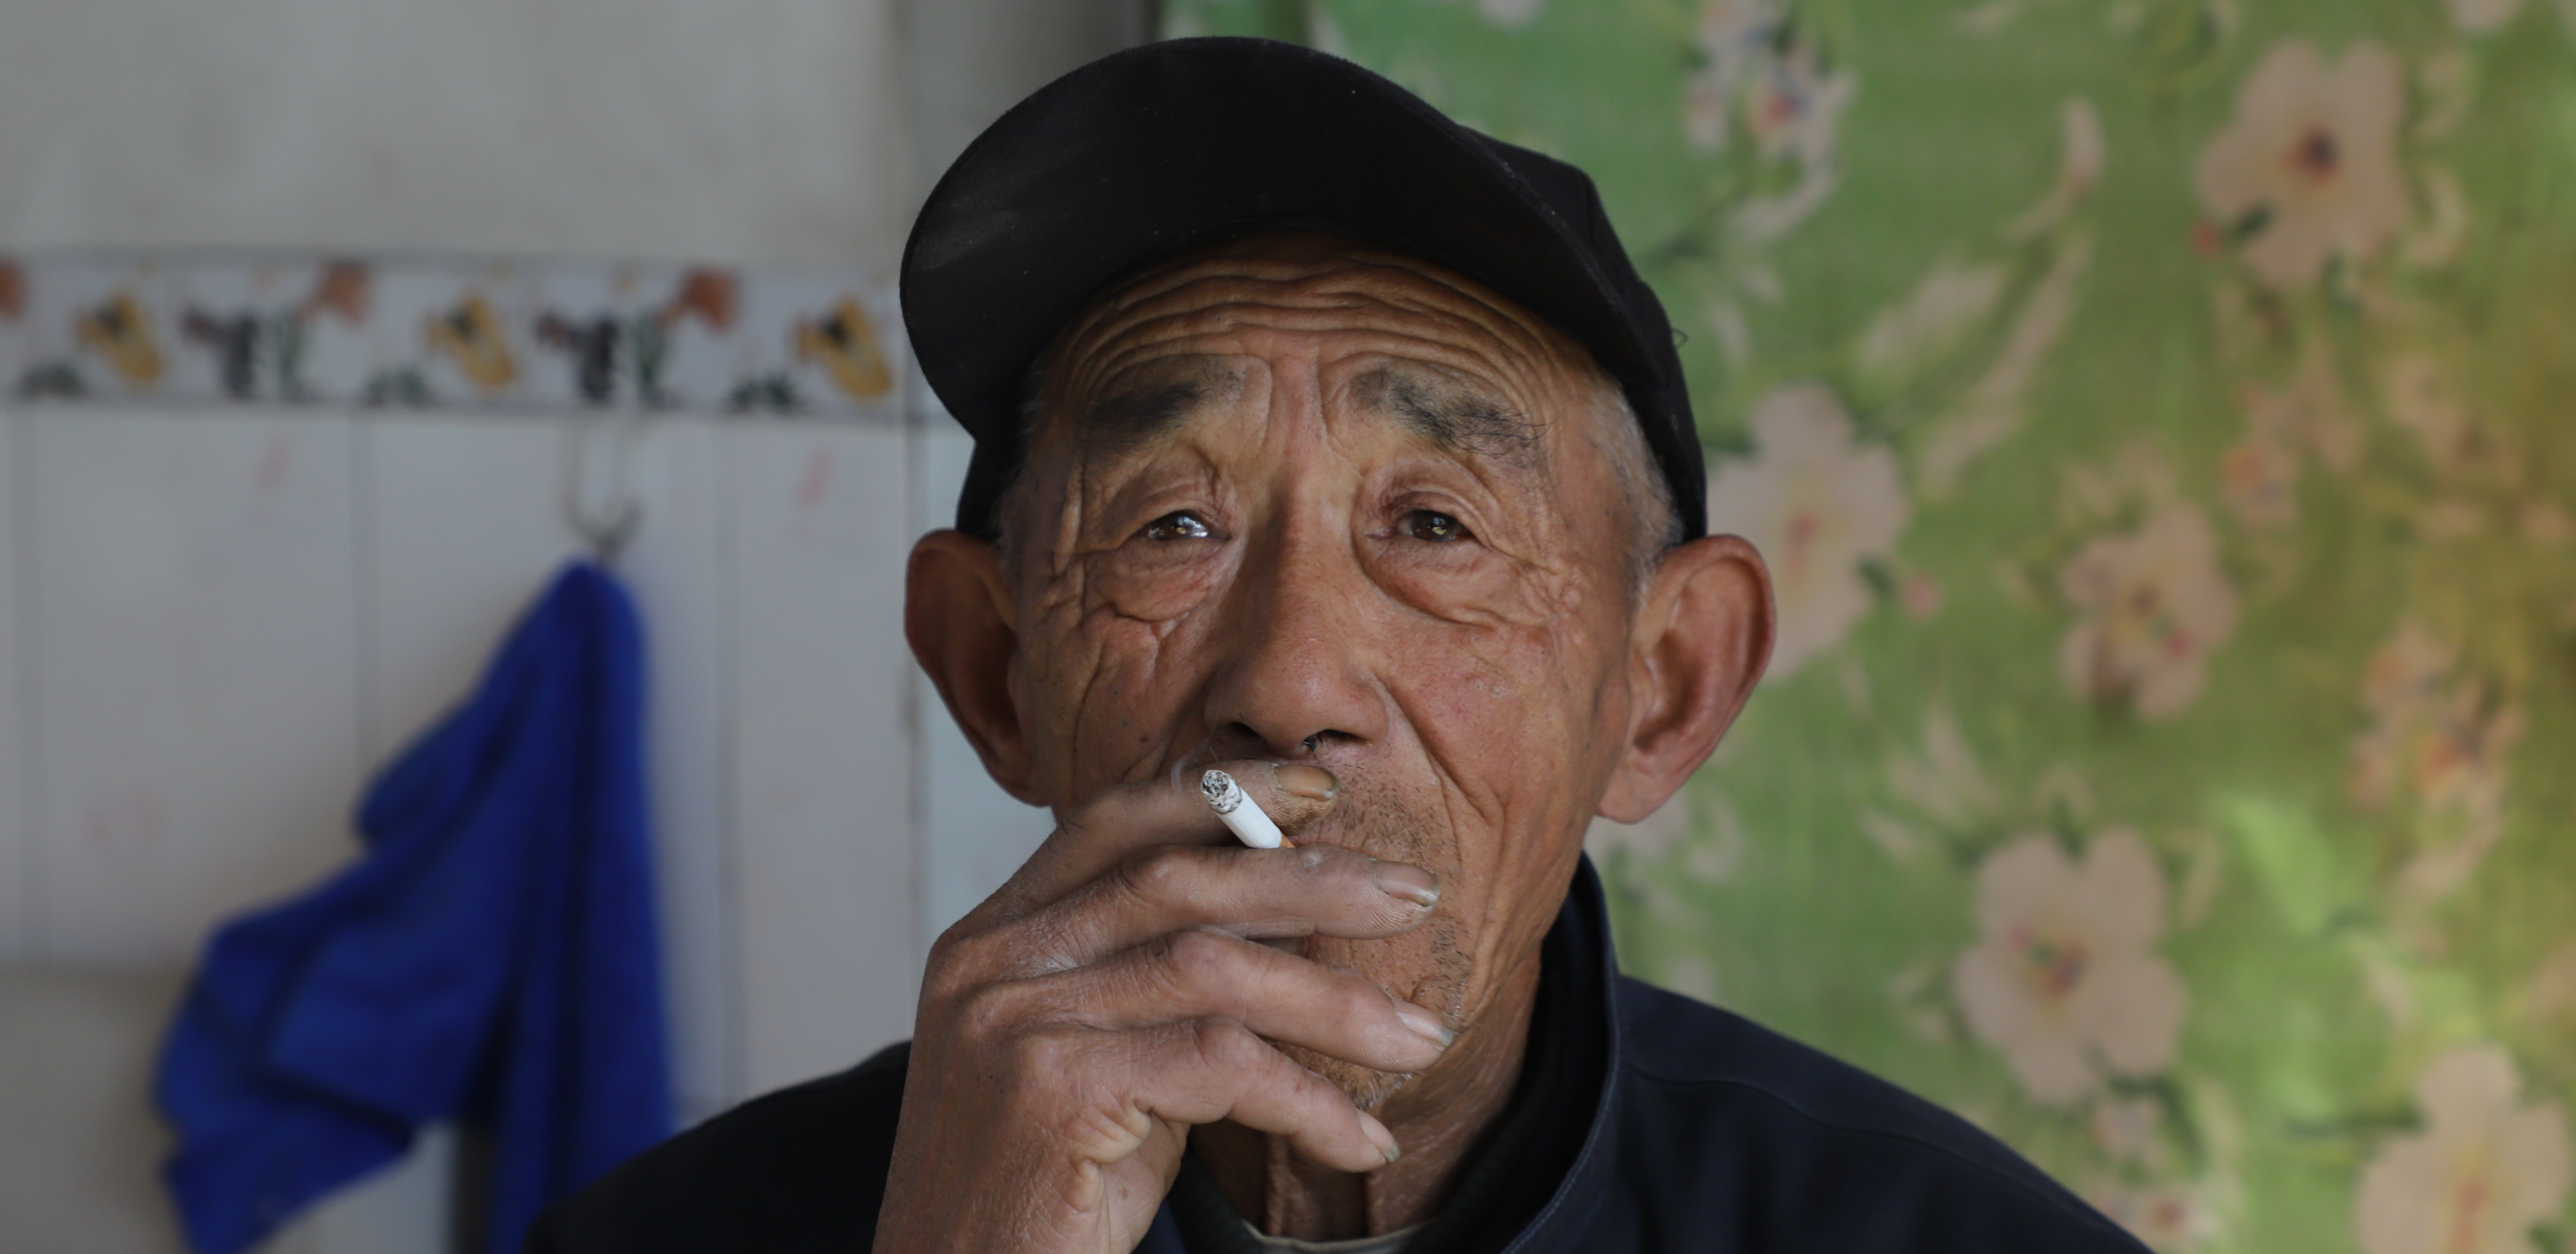 Humans of China: “They Often Spoke About My Older Brother to Keep His Memory Alive”